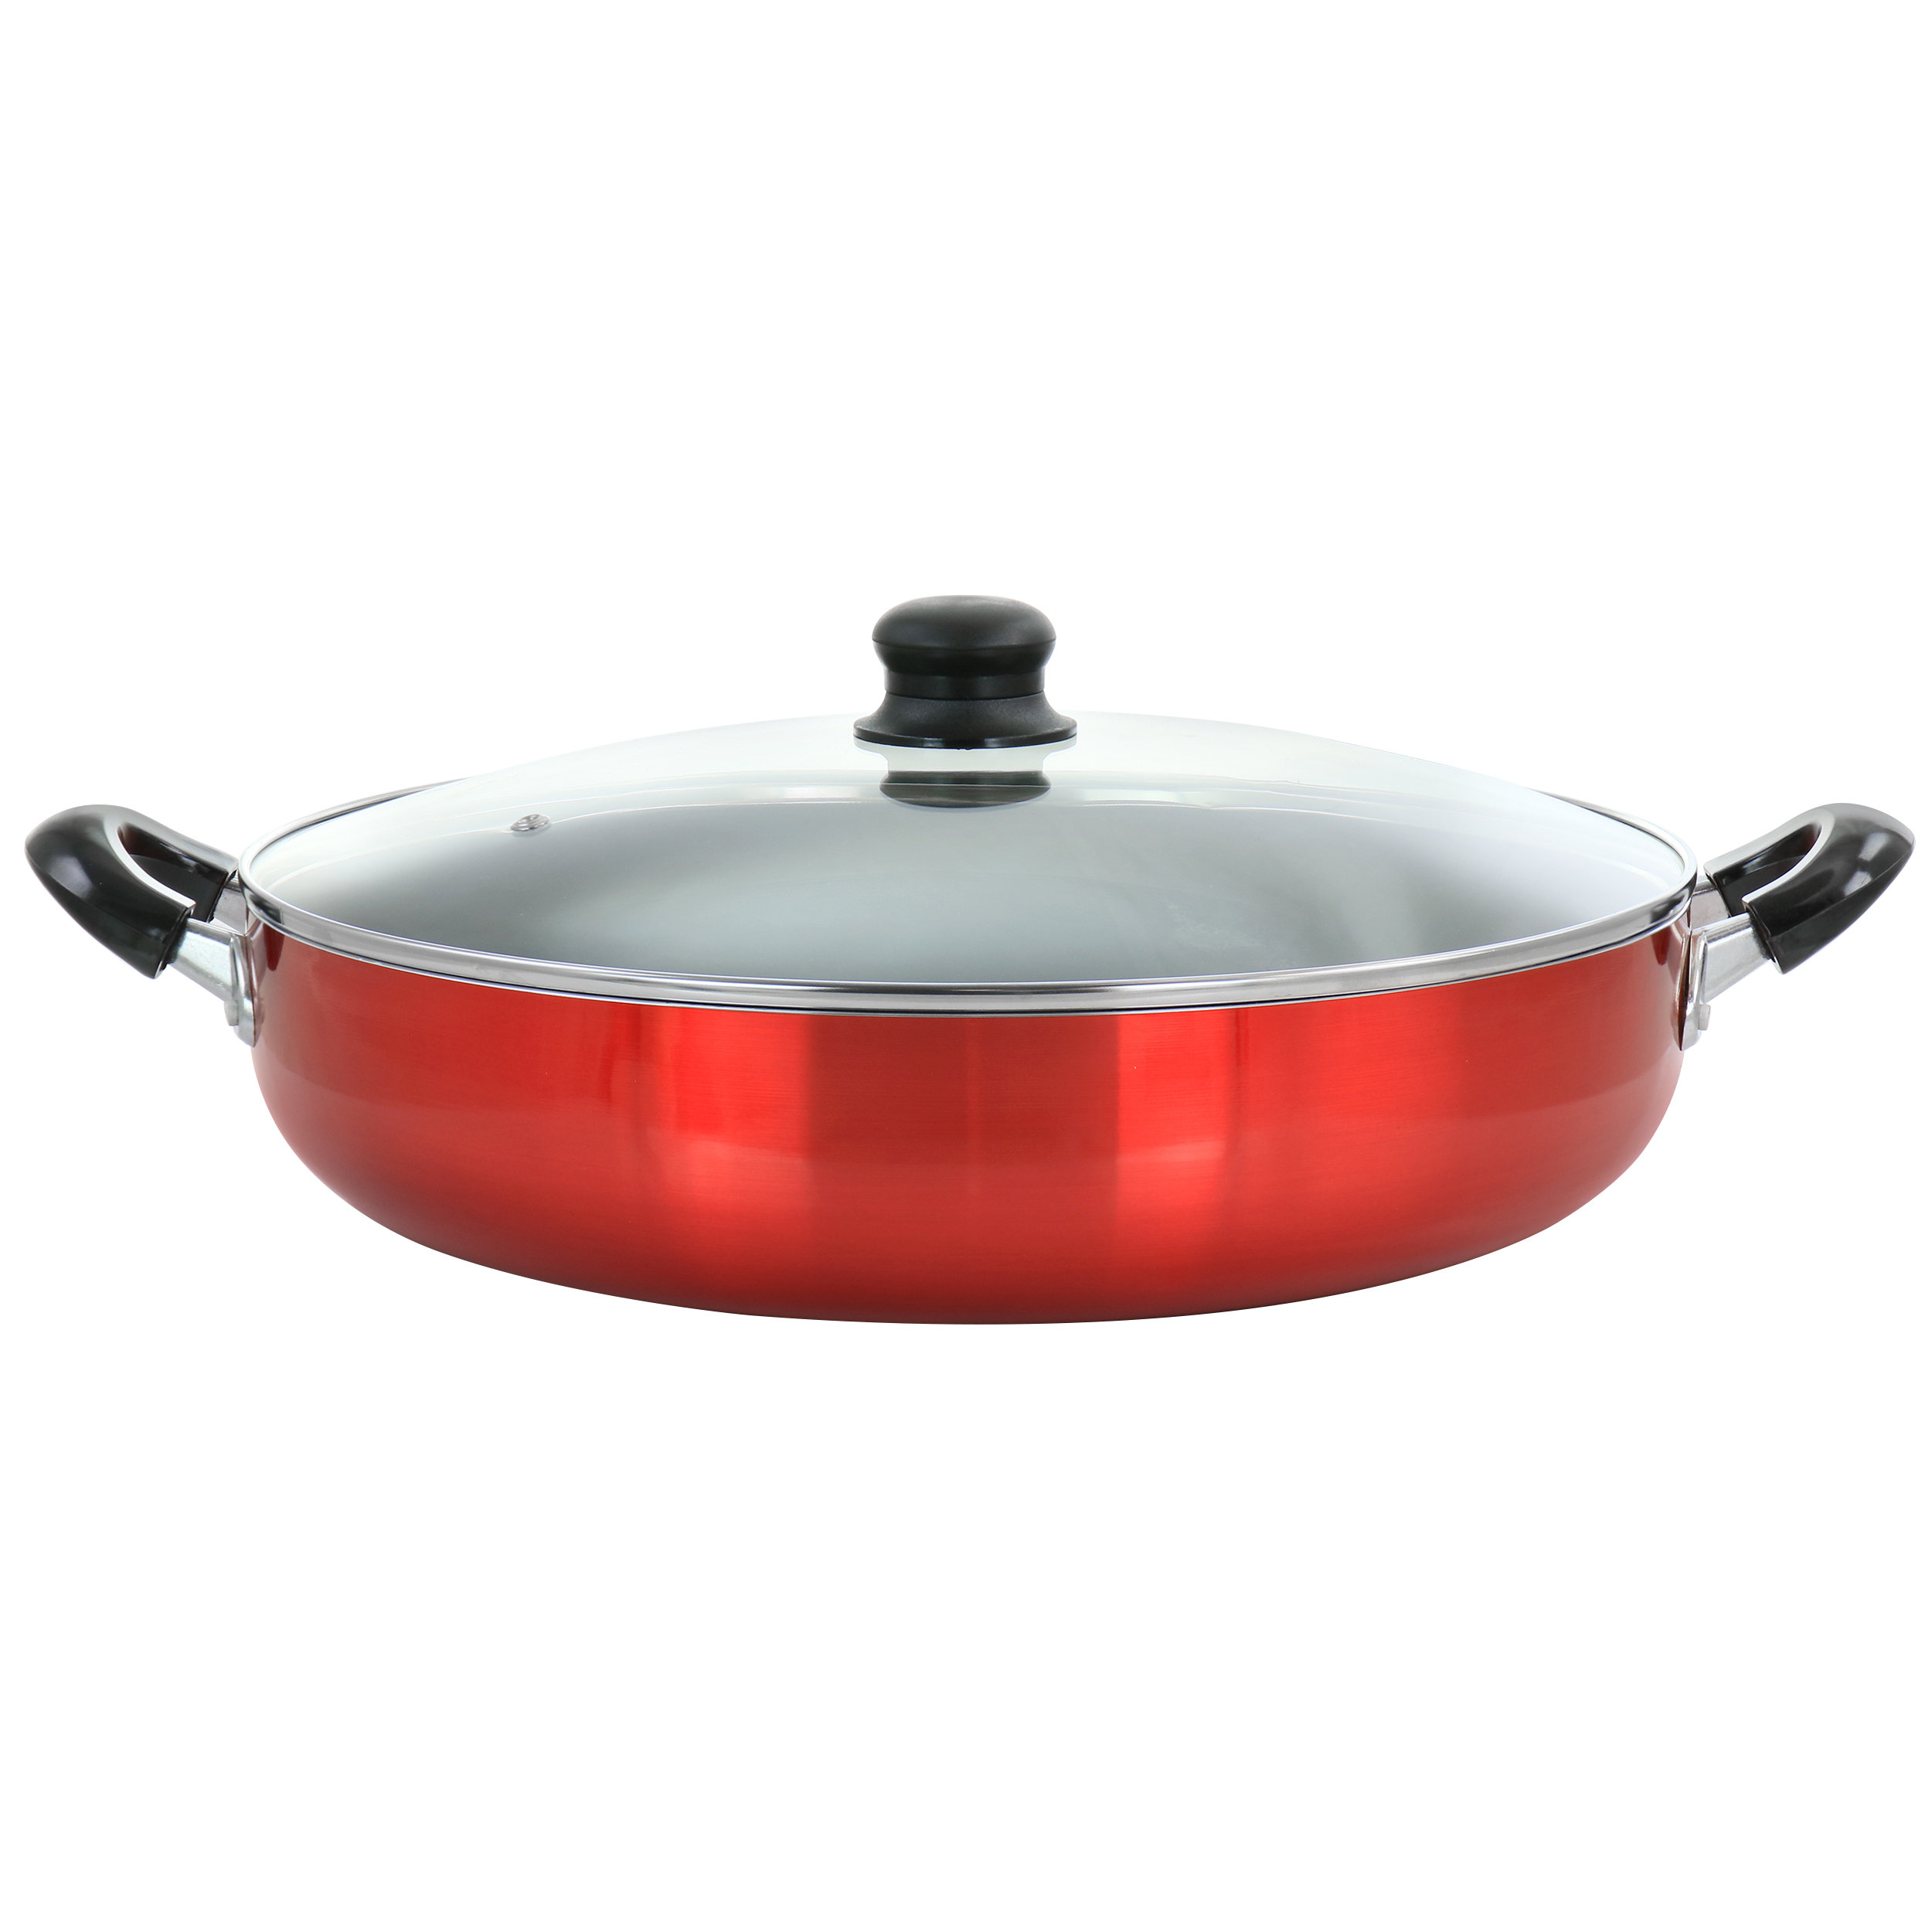 Gotham Steel Ultra 14 Non-Stick Family Pan With Lid And Gold